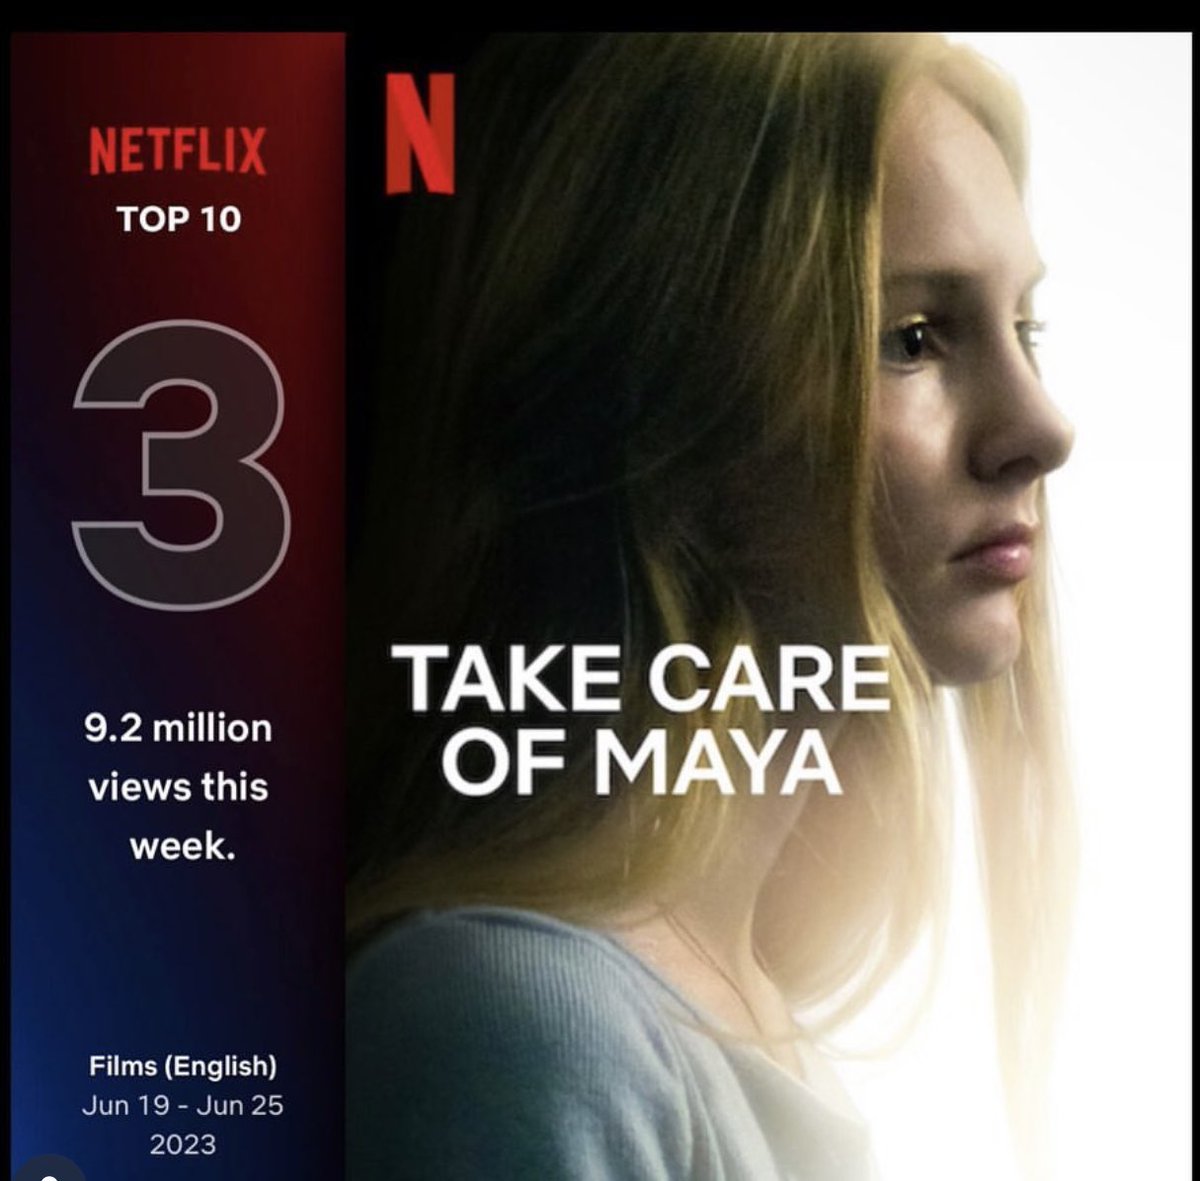 To the 9.2 million of you across the globe who watched Take Care of Maya last week, THANK YOU. The world is now listening. Week two, here we go. #TakeCareOfMaya #netflix #storysyndicate #wisefoolfilms